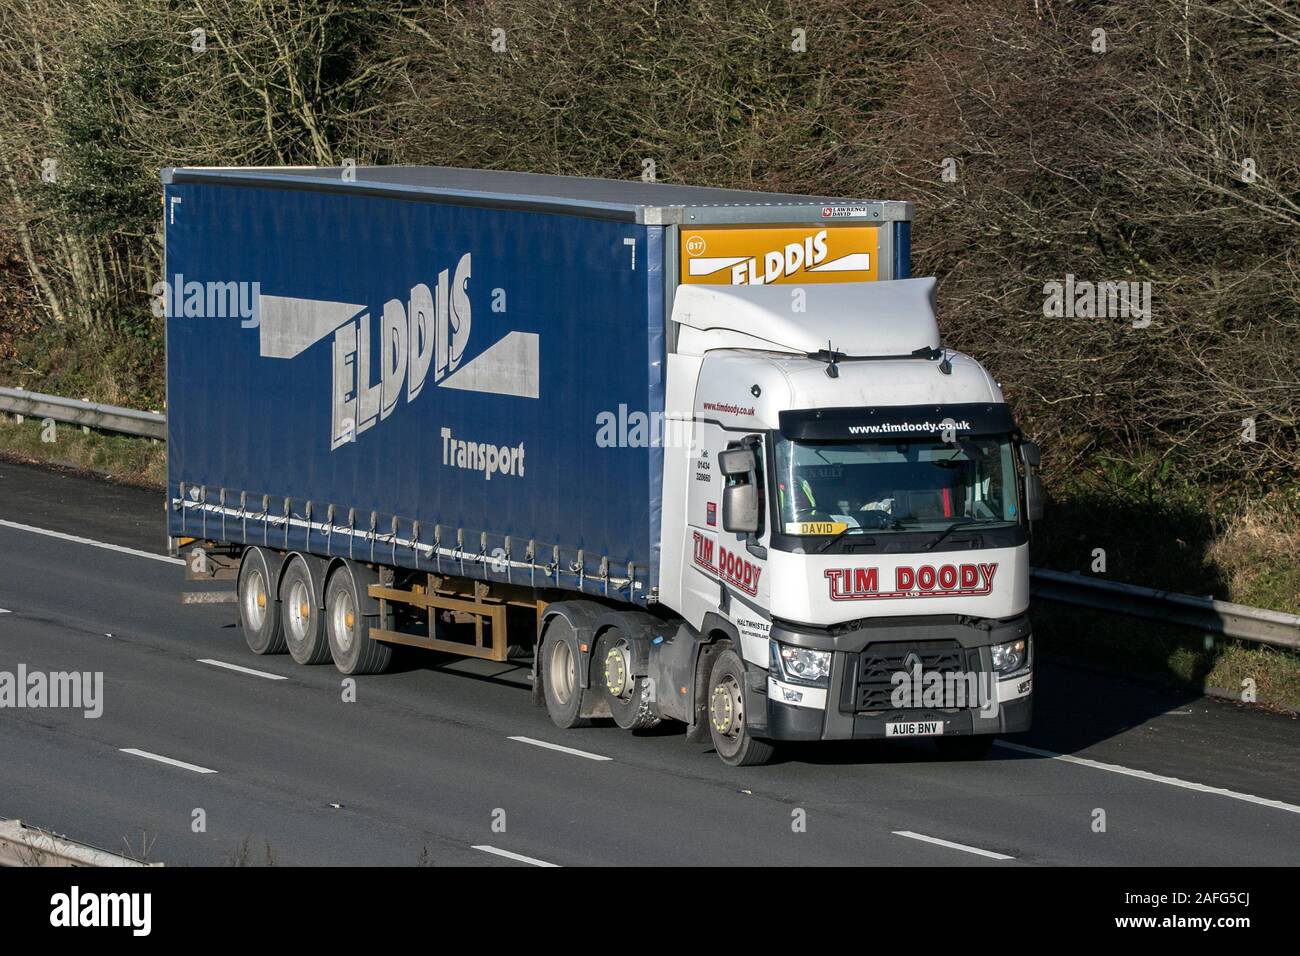 TIM DOODY Elddis Transport; Haulage delivery trucks, lorry, transportation, truck, cargo carrier, vehicle, commercial industry, M6 at Lancaster, UK Stock Photo